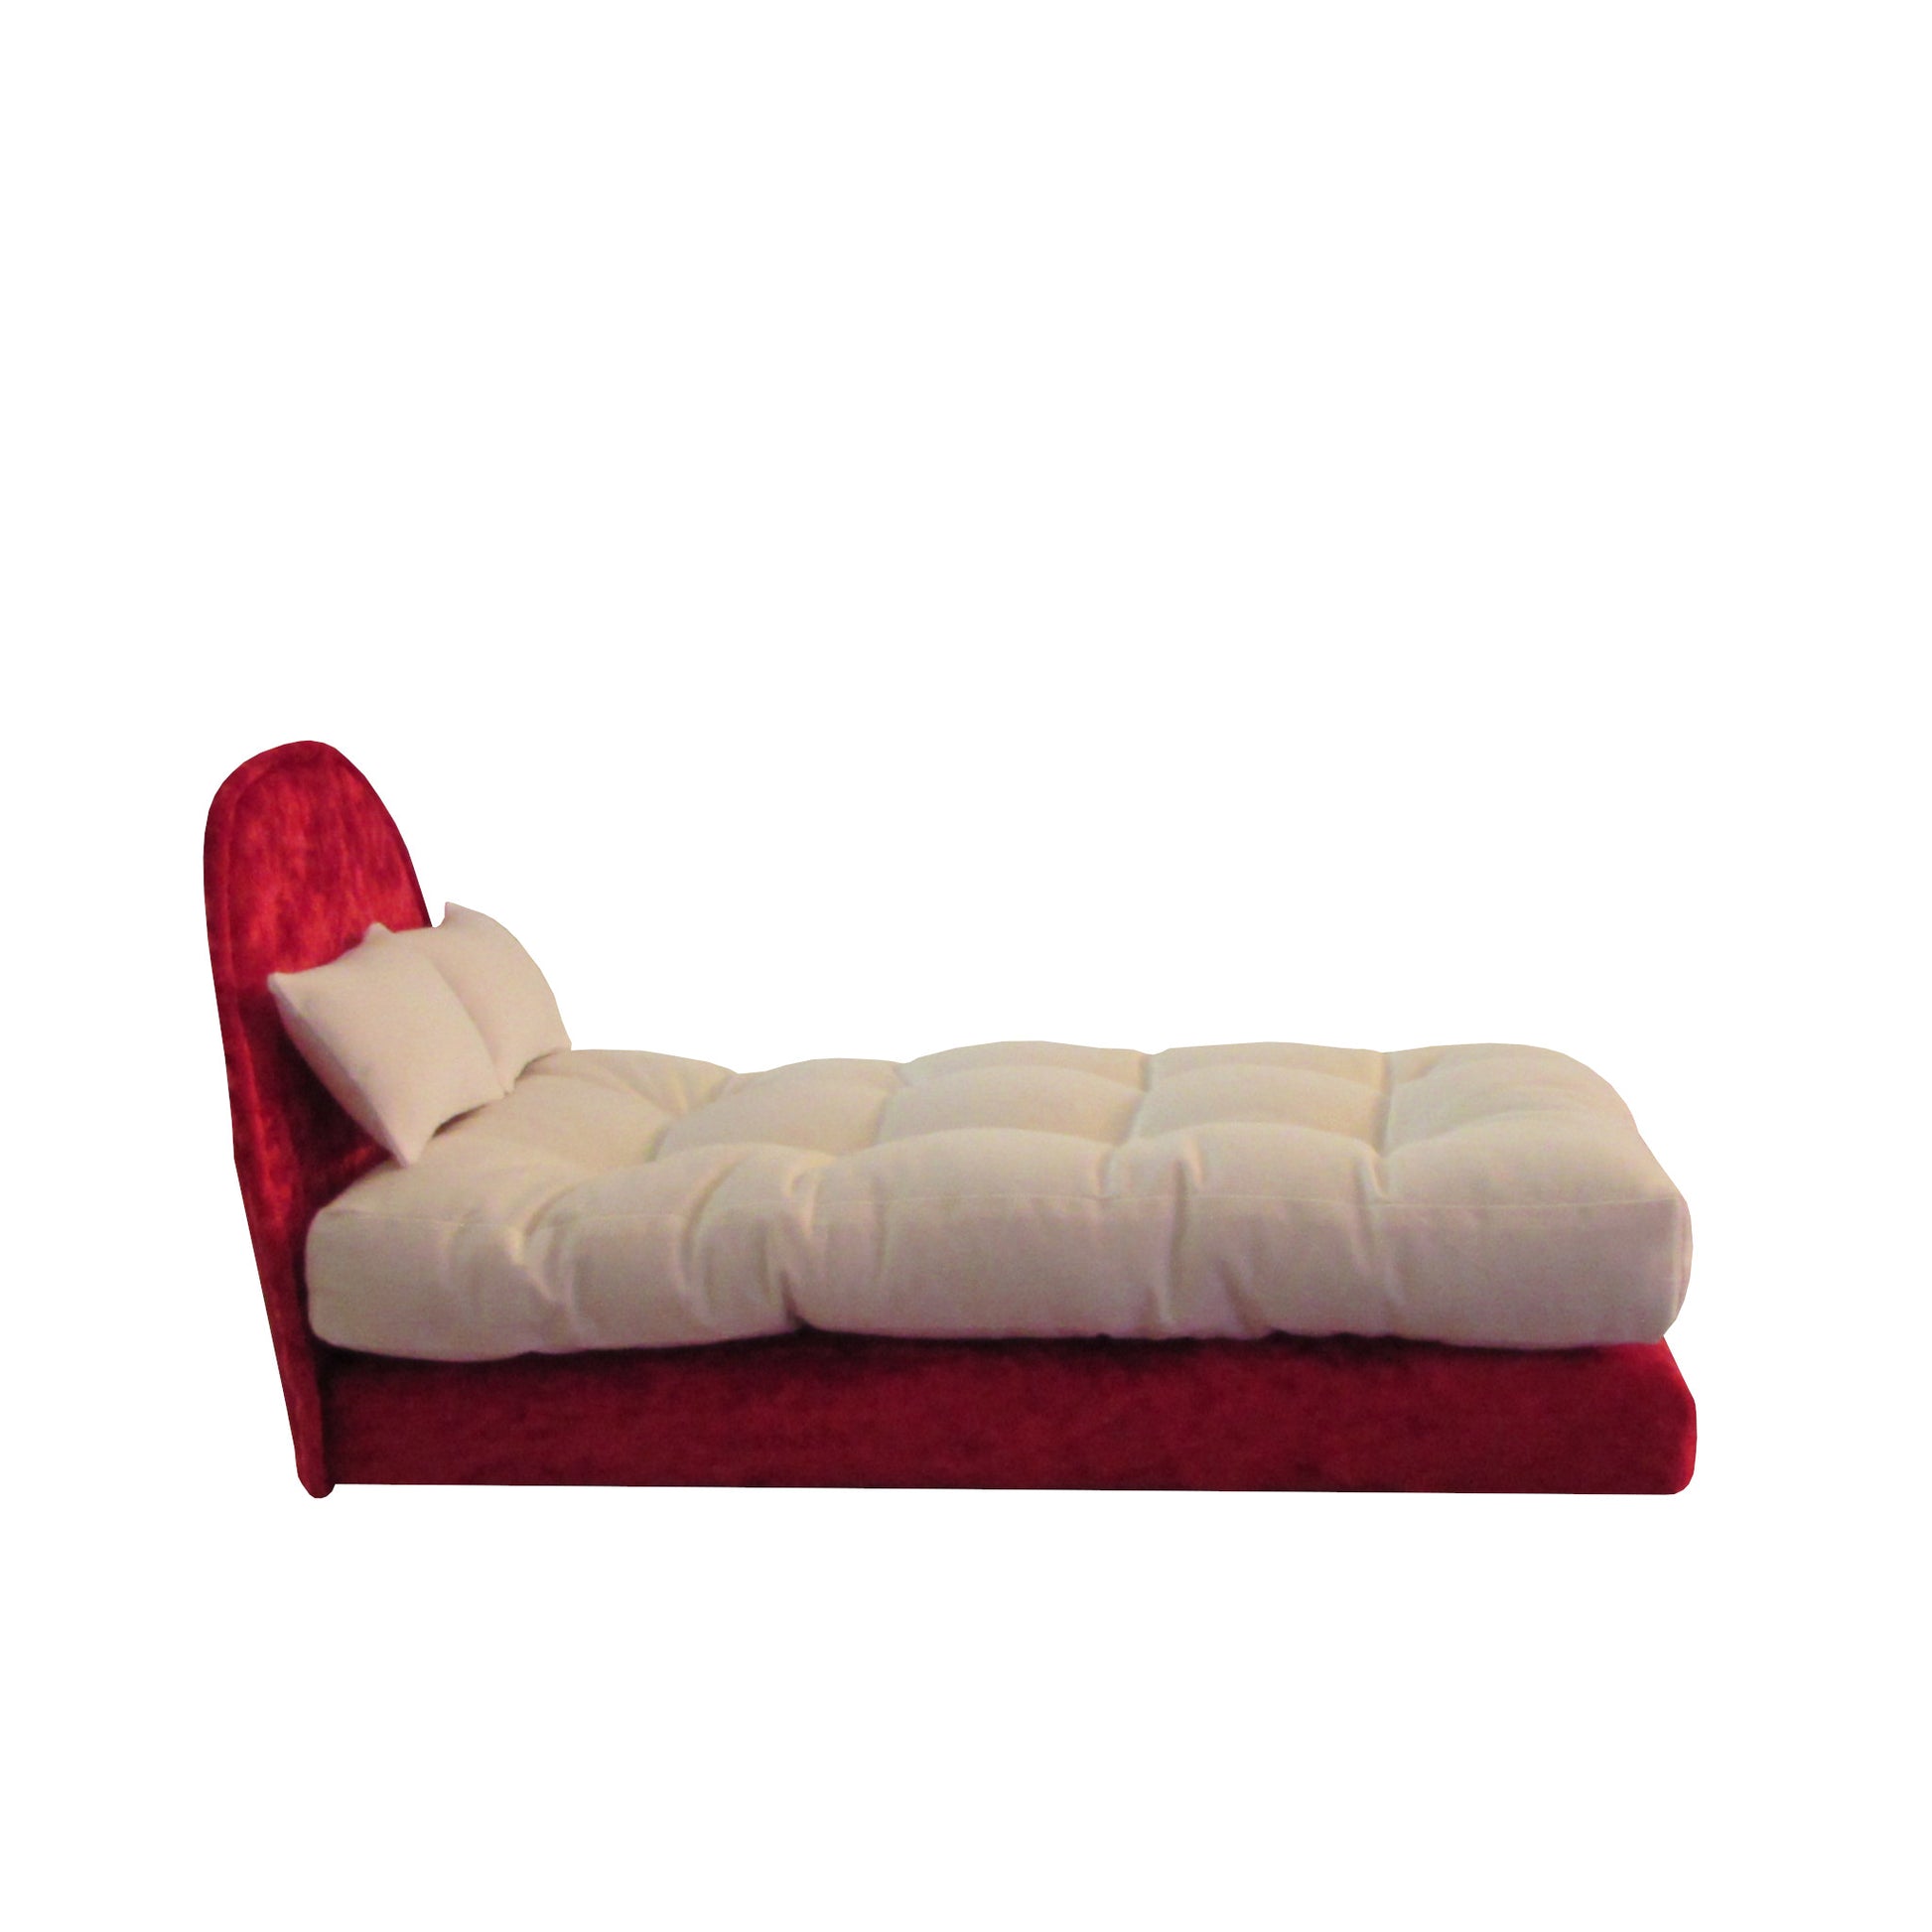 Red Crushed Velvet Double Doll Bed, Pillows, and Mattress for 11.5-inch and 12-inch dolls